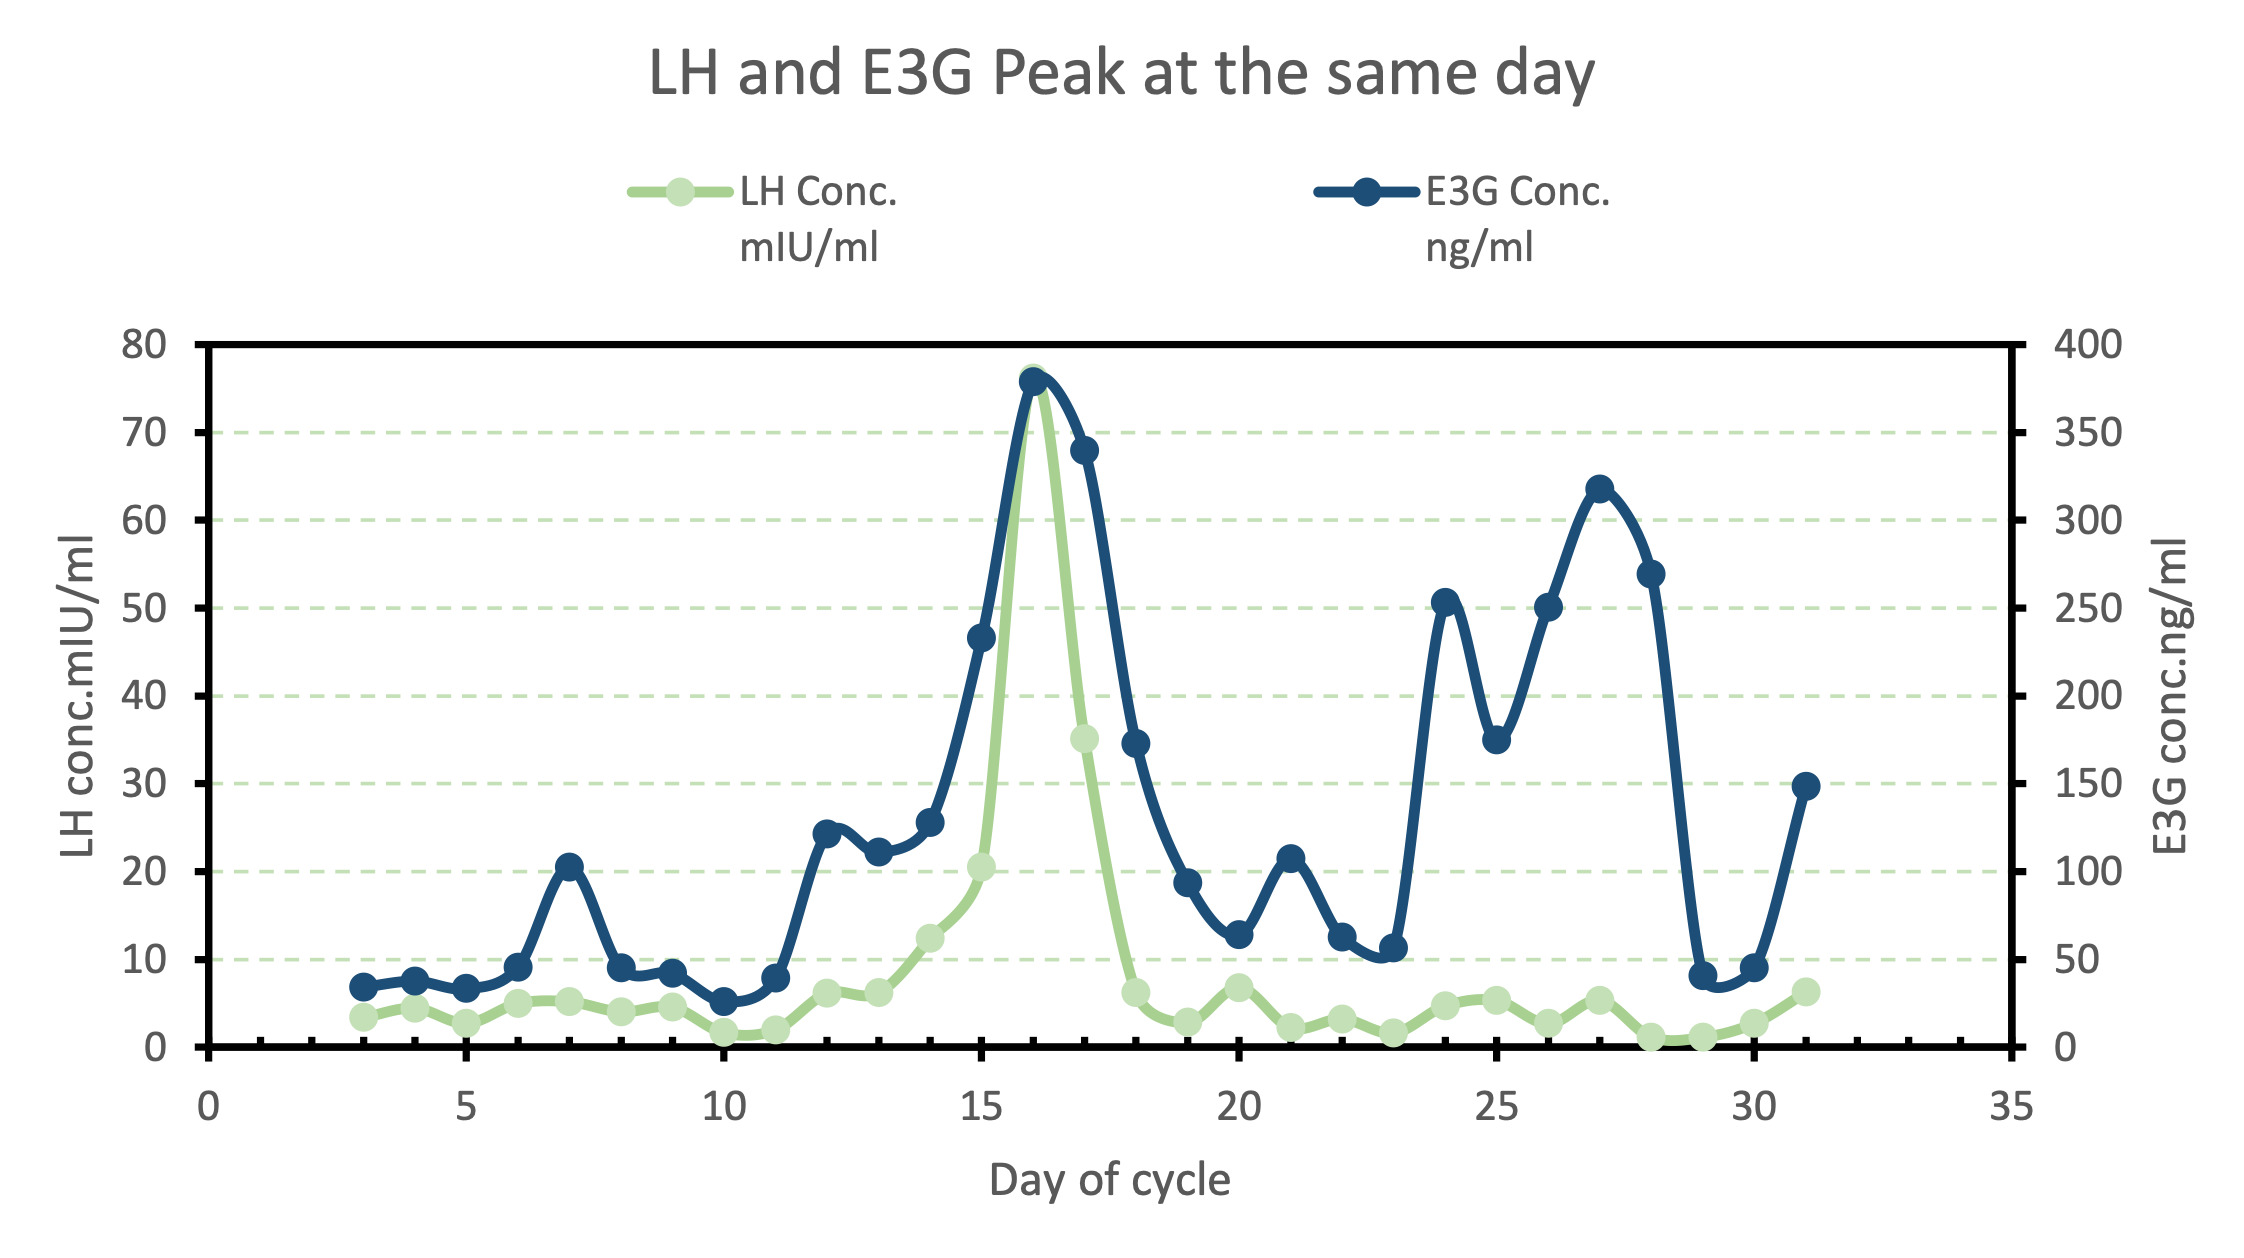 LH and E3G peak at the same day